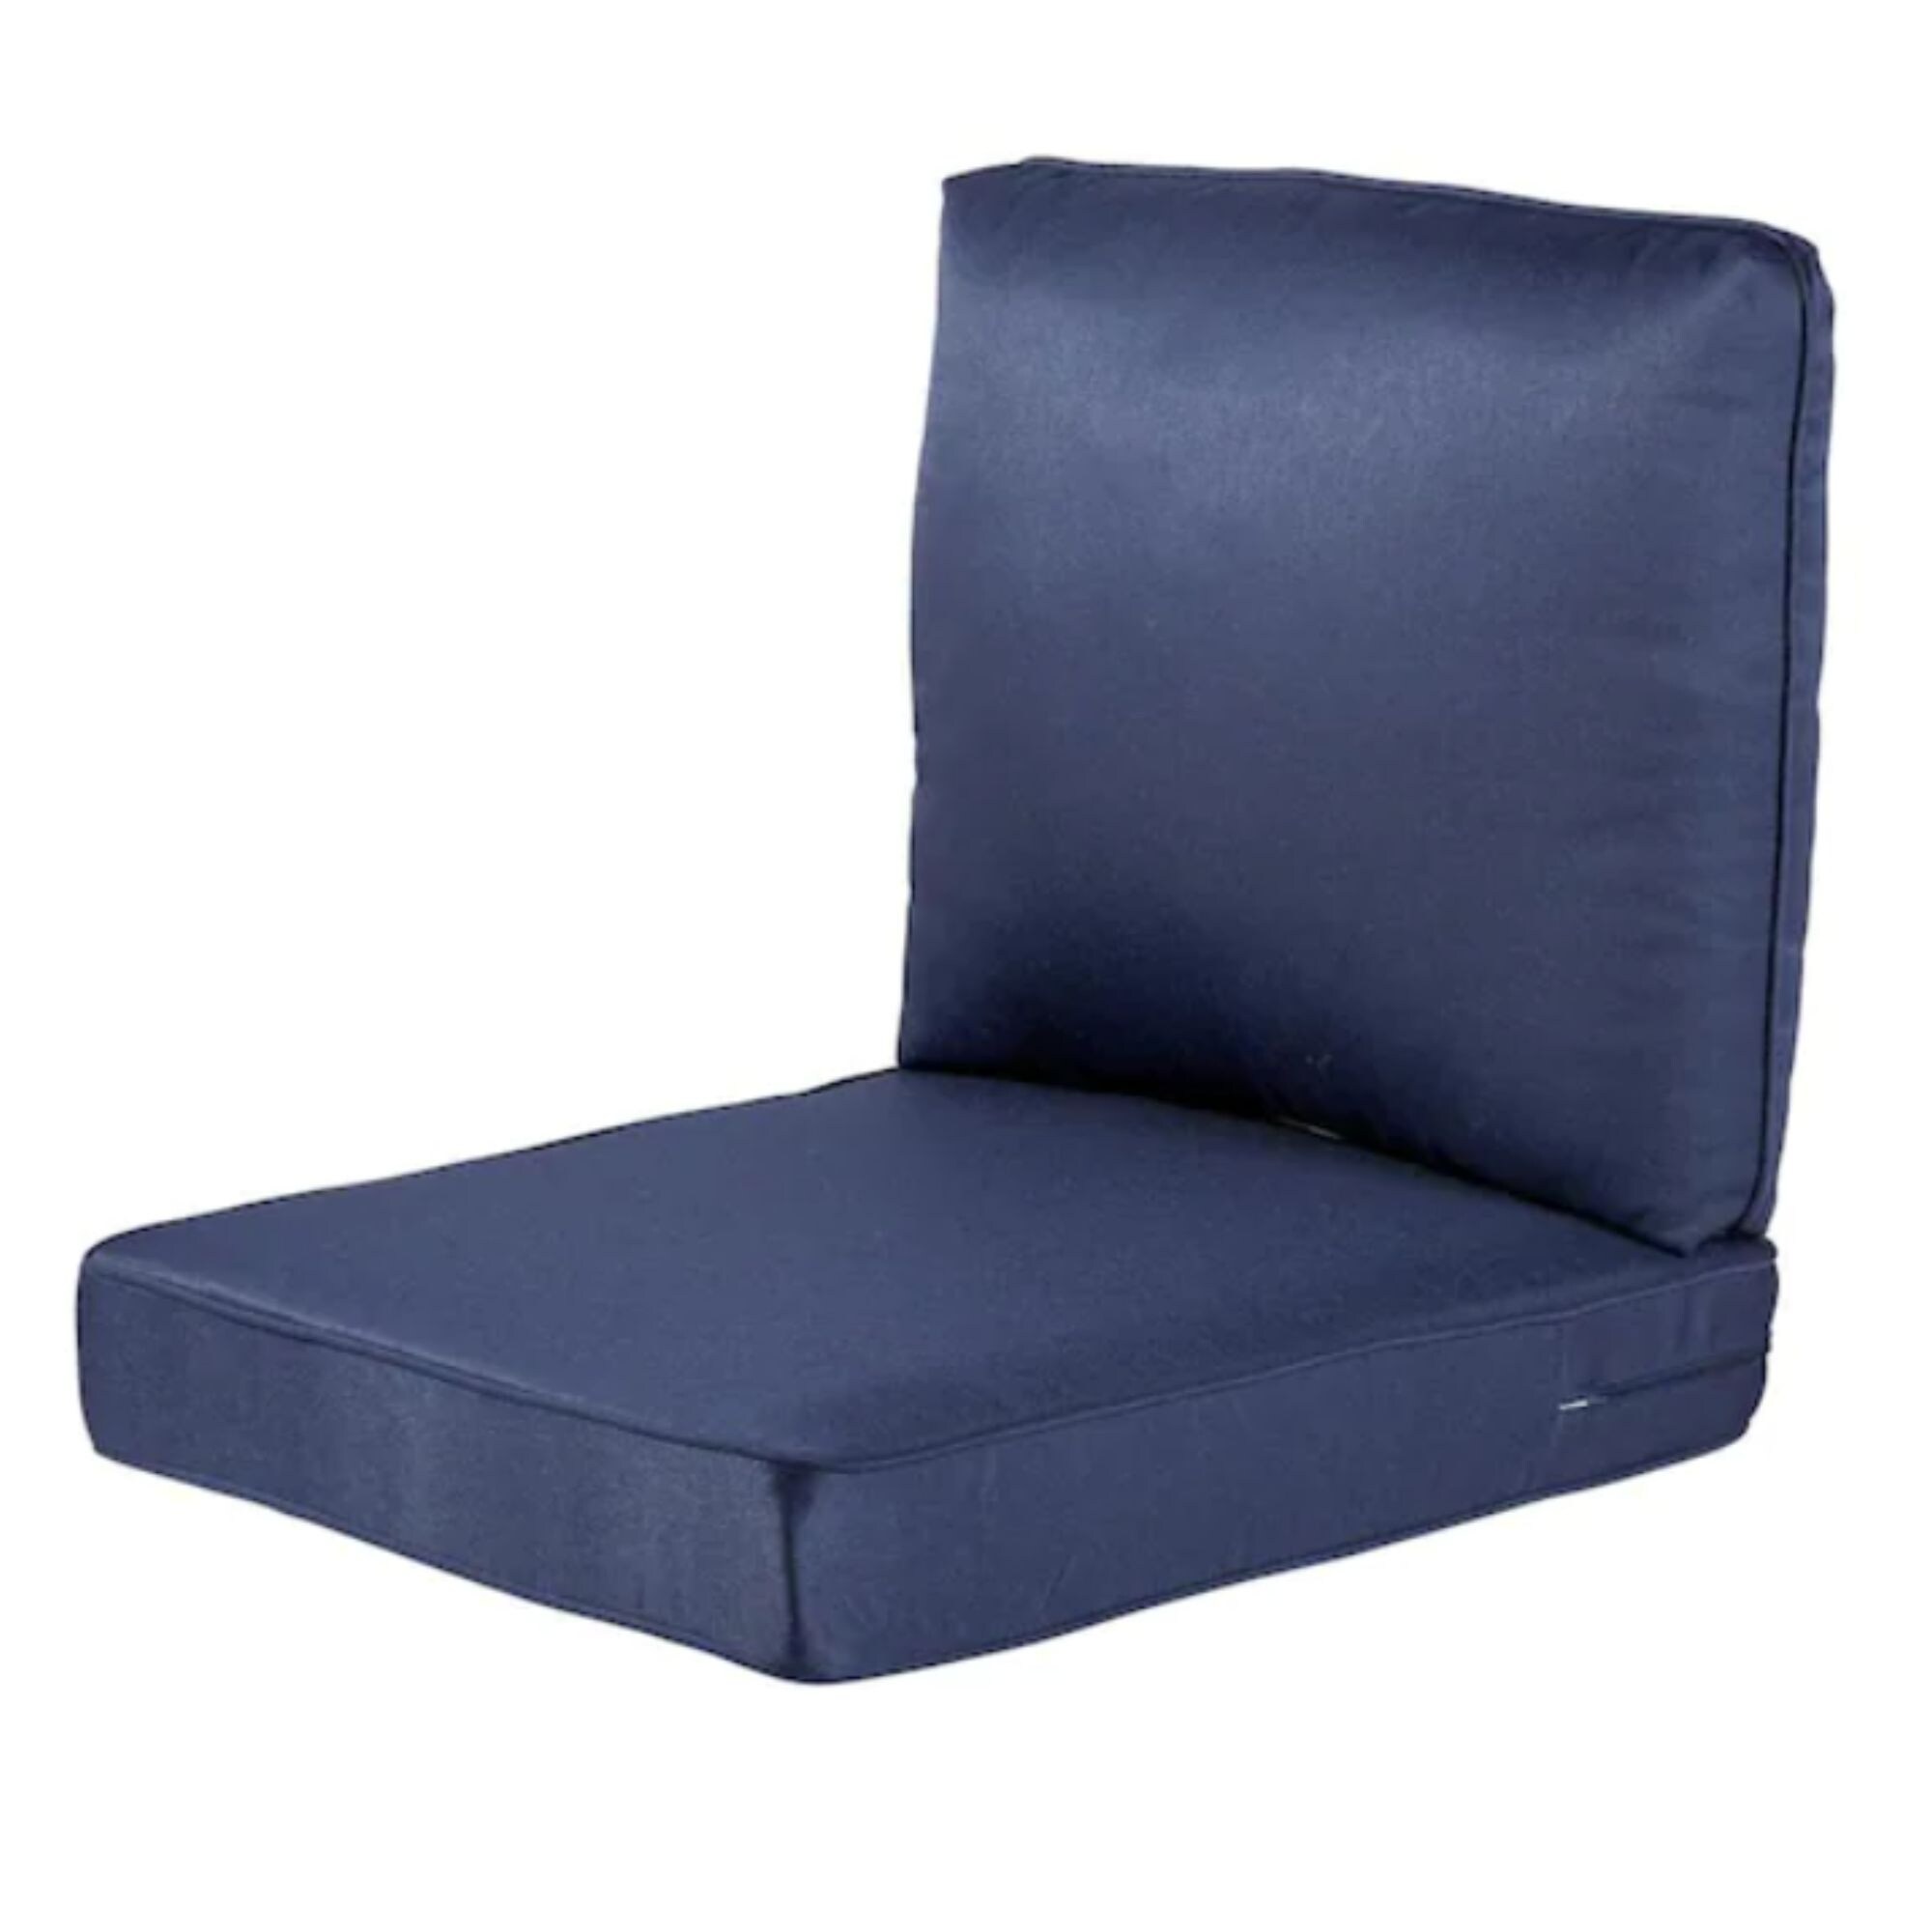 https://ak1.ostkcdn.com/images/products/is/images/direct/bd3a0bcb368fe9b52170f542e304ae6bff6e2f3f/Haven-Way-Universal-Outdoor-Deep-Seat-Lounge-Chair-Cushion-Set.jpg